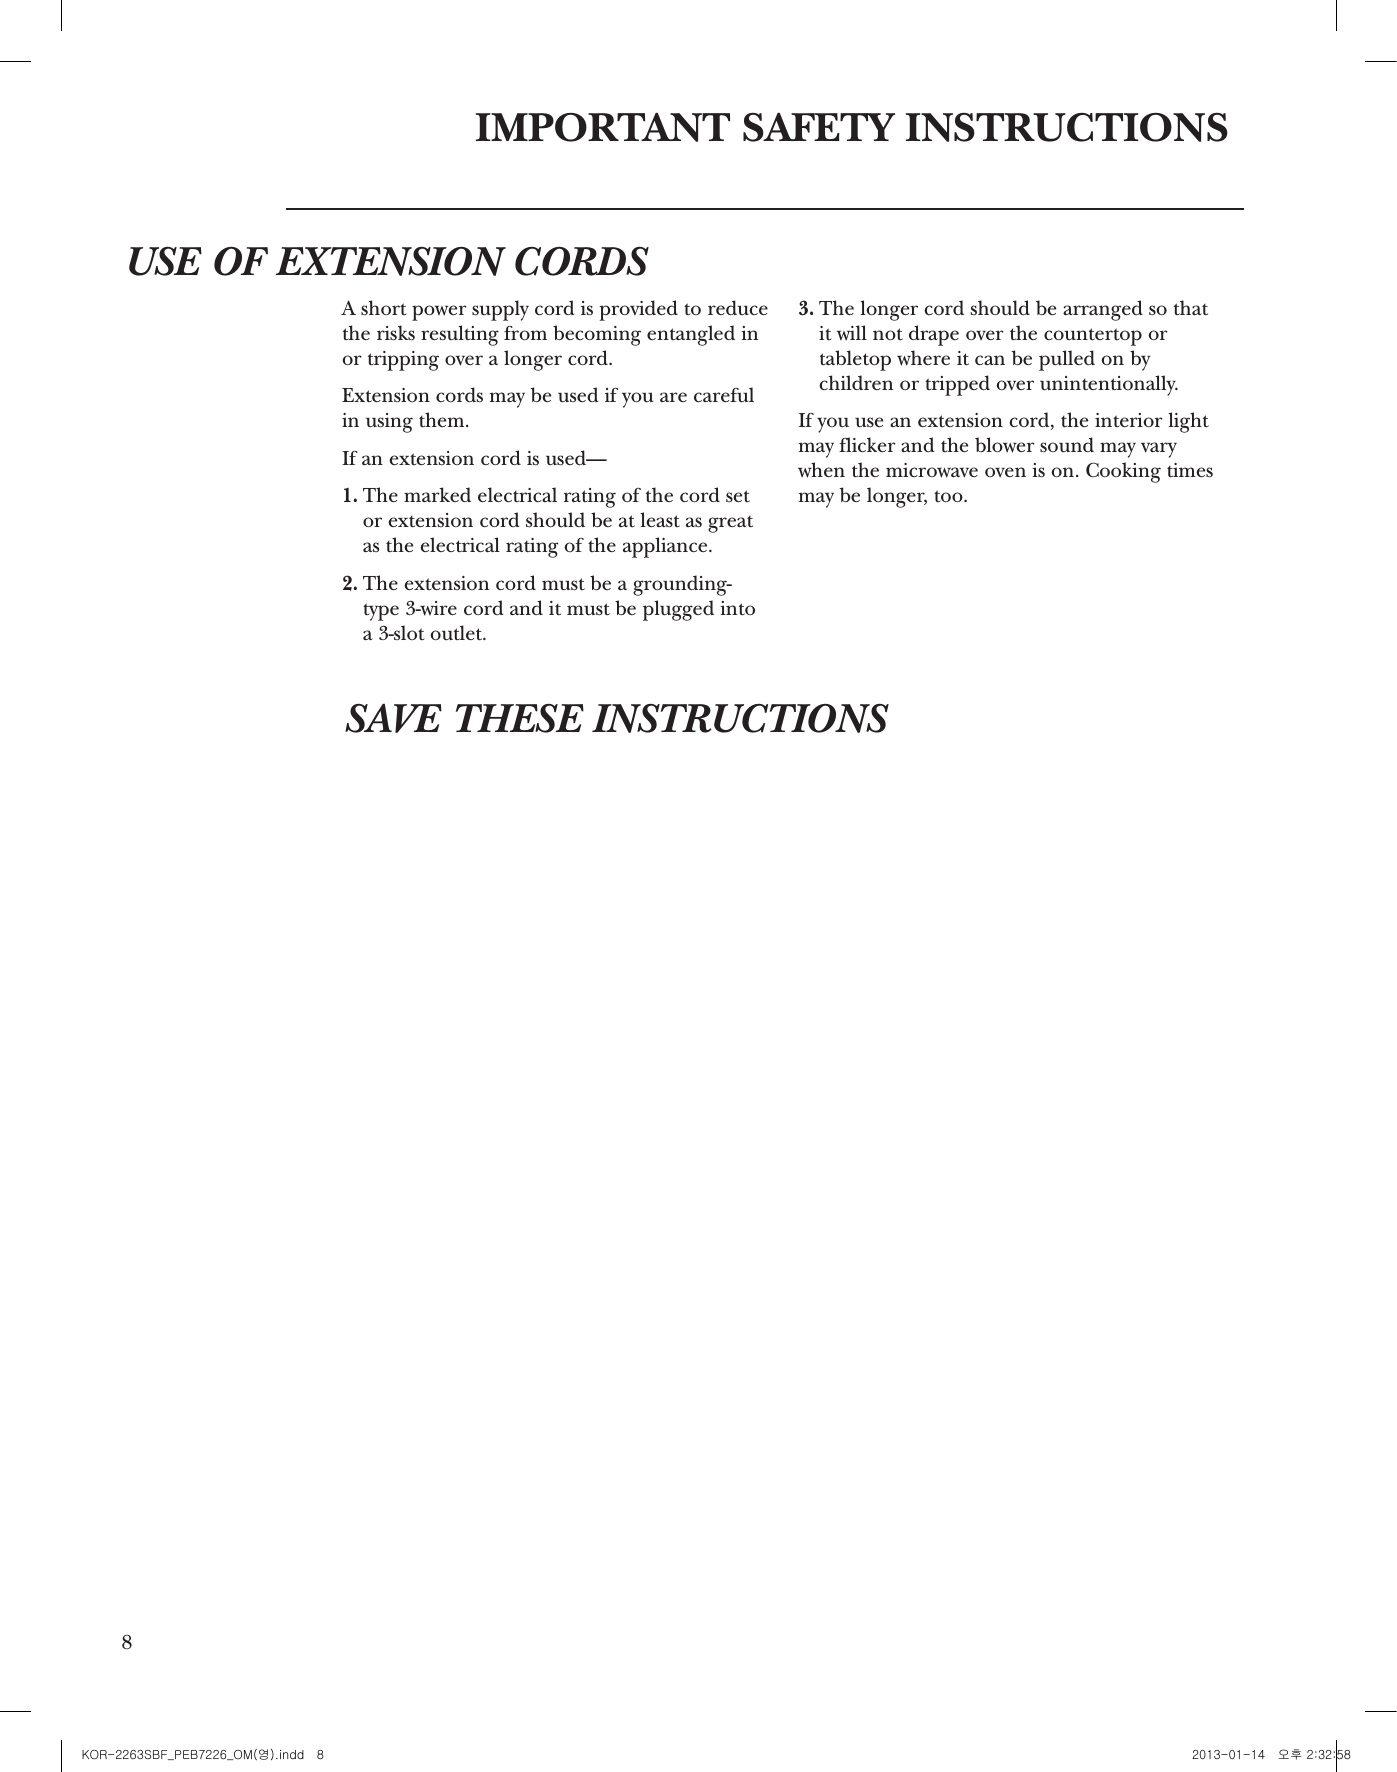 8IMPORTANT SAFETY INSTRUCTIONSUSE OF EXTENSION CORDSSAVE THESE INSTRUCTIONSA short power supply cord is provided to reducethe risks resulting from becoming entangled inor tripping over a longer cord.Extension cords may be used if you are carefulin using them.If an extension cord is used—1. The marked electrical rating of the cord setor extension cord should be at least as greatas the electrical rating of the appliance.2. The extension cord must be a grounding-type 3-wire cord and it must be plugged into a 3-slot outlet. 3. The longer cord should be arranged so that it will not drape over the countertop ortabletop where it can be pulled on bychildren or tripped over unintentionally.If you use an extension cord, the interior lightmay flicker and the blower sound may varywhen the microwave oven is on. Cooking timesmay be longer, too.9421 367 5Features of Your OvenCountertop Microwave Oven1. Door Latches. 2. Window with Metal Shield. Screen allowscooking to be viewed while keepingmicrowaves conned in the oven.3. Convenience Guide.4. Touch Control Panel and Display.5. Door Latch Release. Press latch releasebutton to open door.6. Removable Turntable.Turntable andsupport mustbe in place when using theoven. The turntable may be removed forcleaning.7. Removable Turntable Support. Theturntable support must be in place whenusing the oven.NOTE: Rating plate, oven vent(s) and ovenlight are located on the inside walls of themicrowave oven.OptionalAccessoriesAvailable at extra cost from your GE supplier.Choose the appropriate Installation Kit toconvert this oven to a built-in wall oven.For 27installations:Model KitPEB7226DF1WW  JX7227DF1WWPEB7226DF1BB  JX7227DF1BBPEB7226SF1SS  JX7227SF1SS  For 30 installations:Model KitPEB7226DF1WW  JX7230DF1WWPEB7226DF1BB  JX7230DF1BBPEB7226SF1SS  JX7230SF1SS      Throughoutthis manual,features andappearancemay var yfrom yourmodel1100 wattsKOR-2263SBF_PEB7226_OM(영).indd   8 2013-01-14   오후 2:32:58